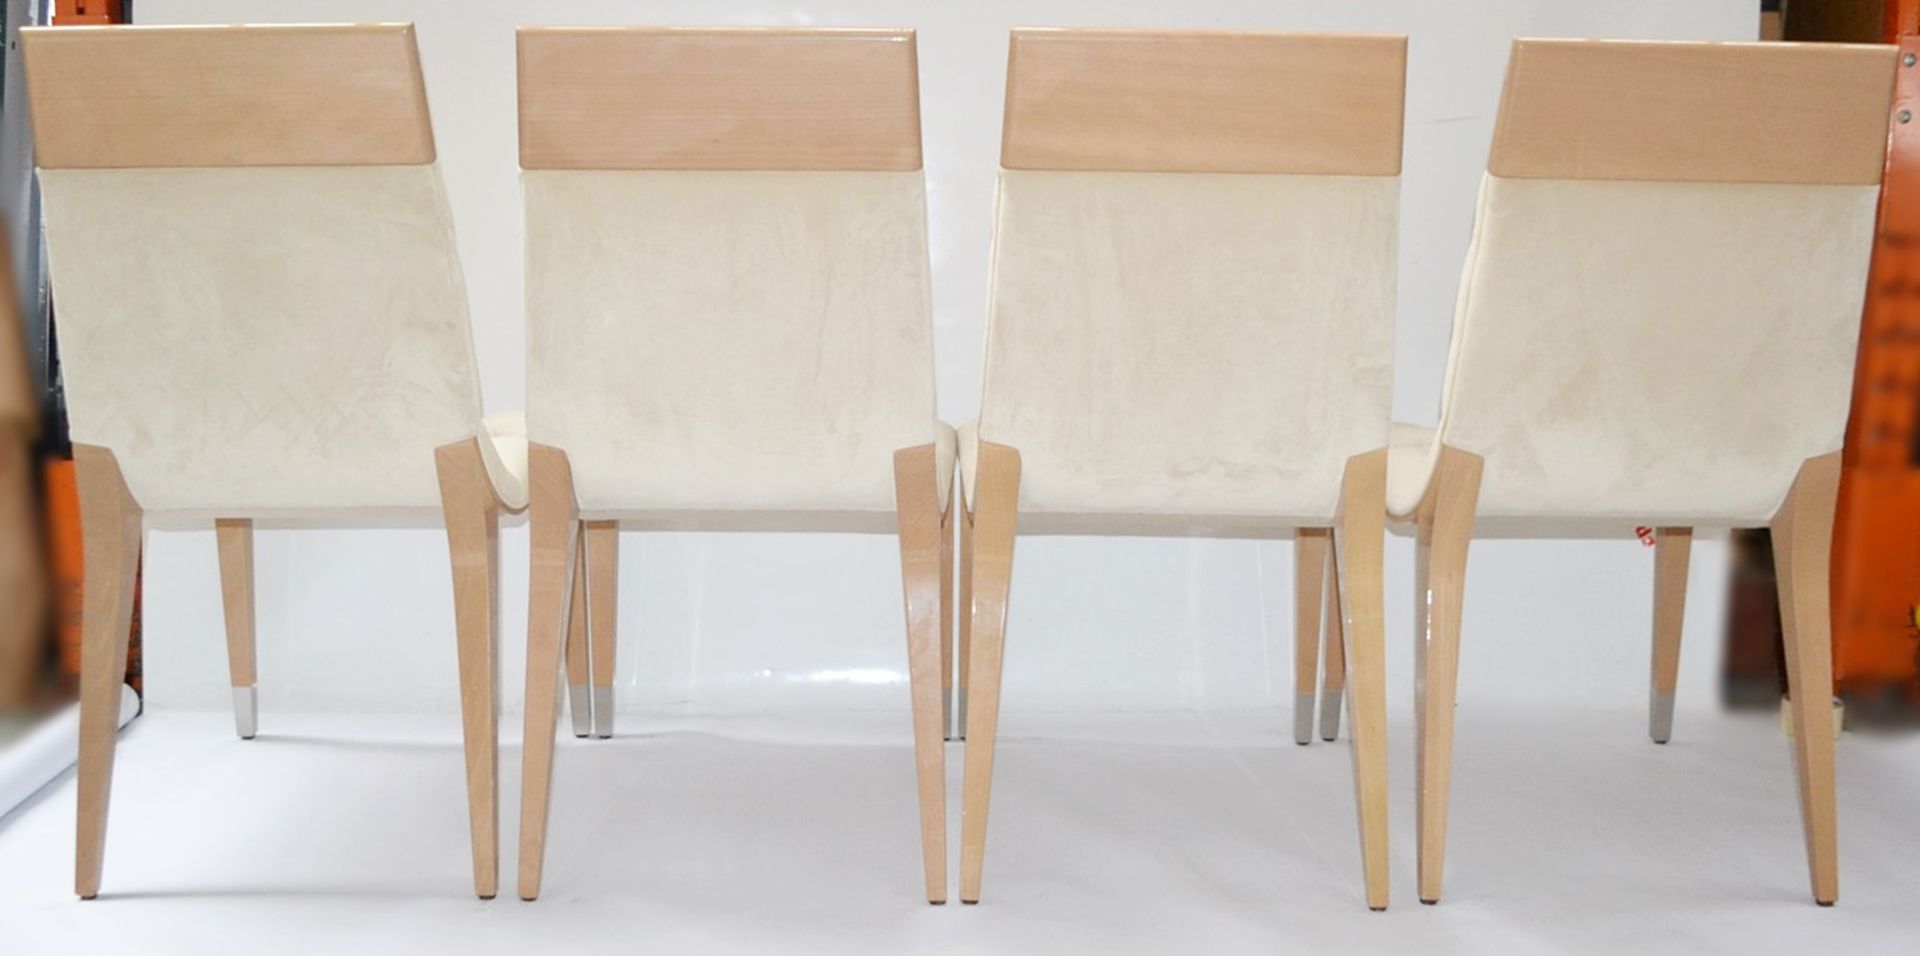 4 x GIORGIO COLLECTION 'Sunrise' Italian Designer Dining Chairs - Pre-owned In Good Condition - Image 9 of 14